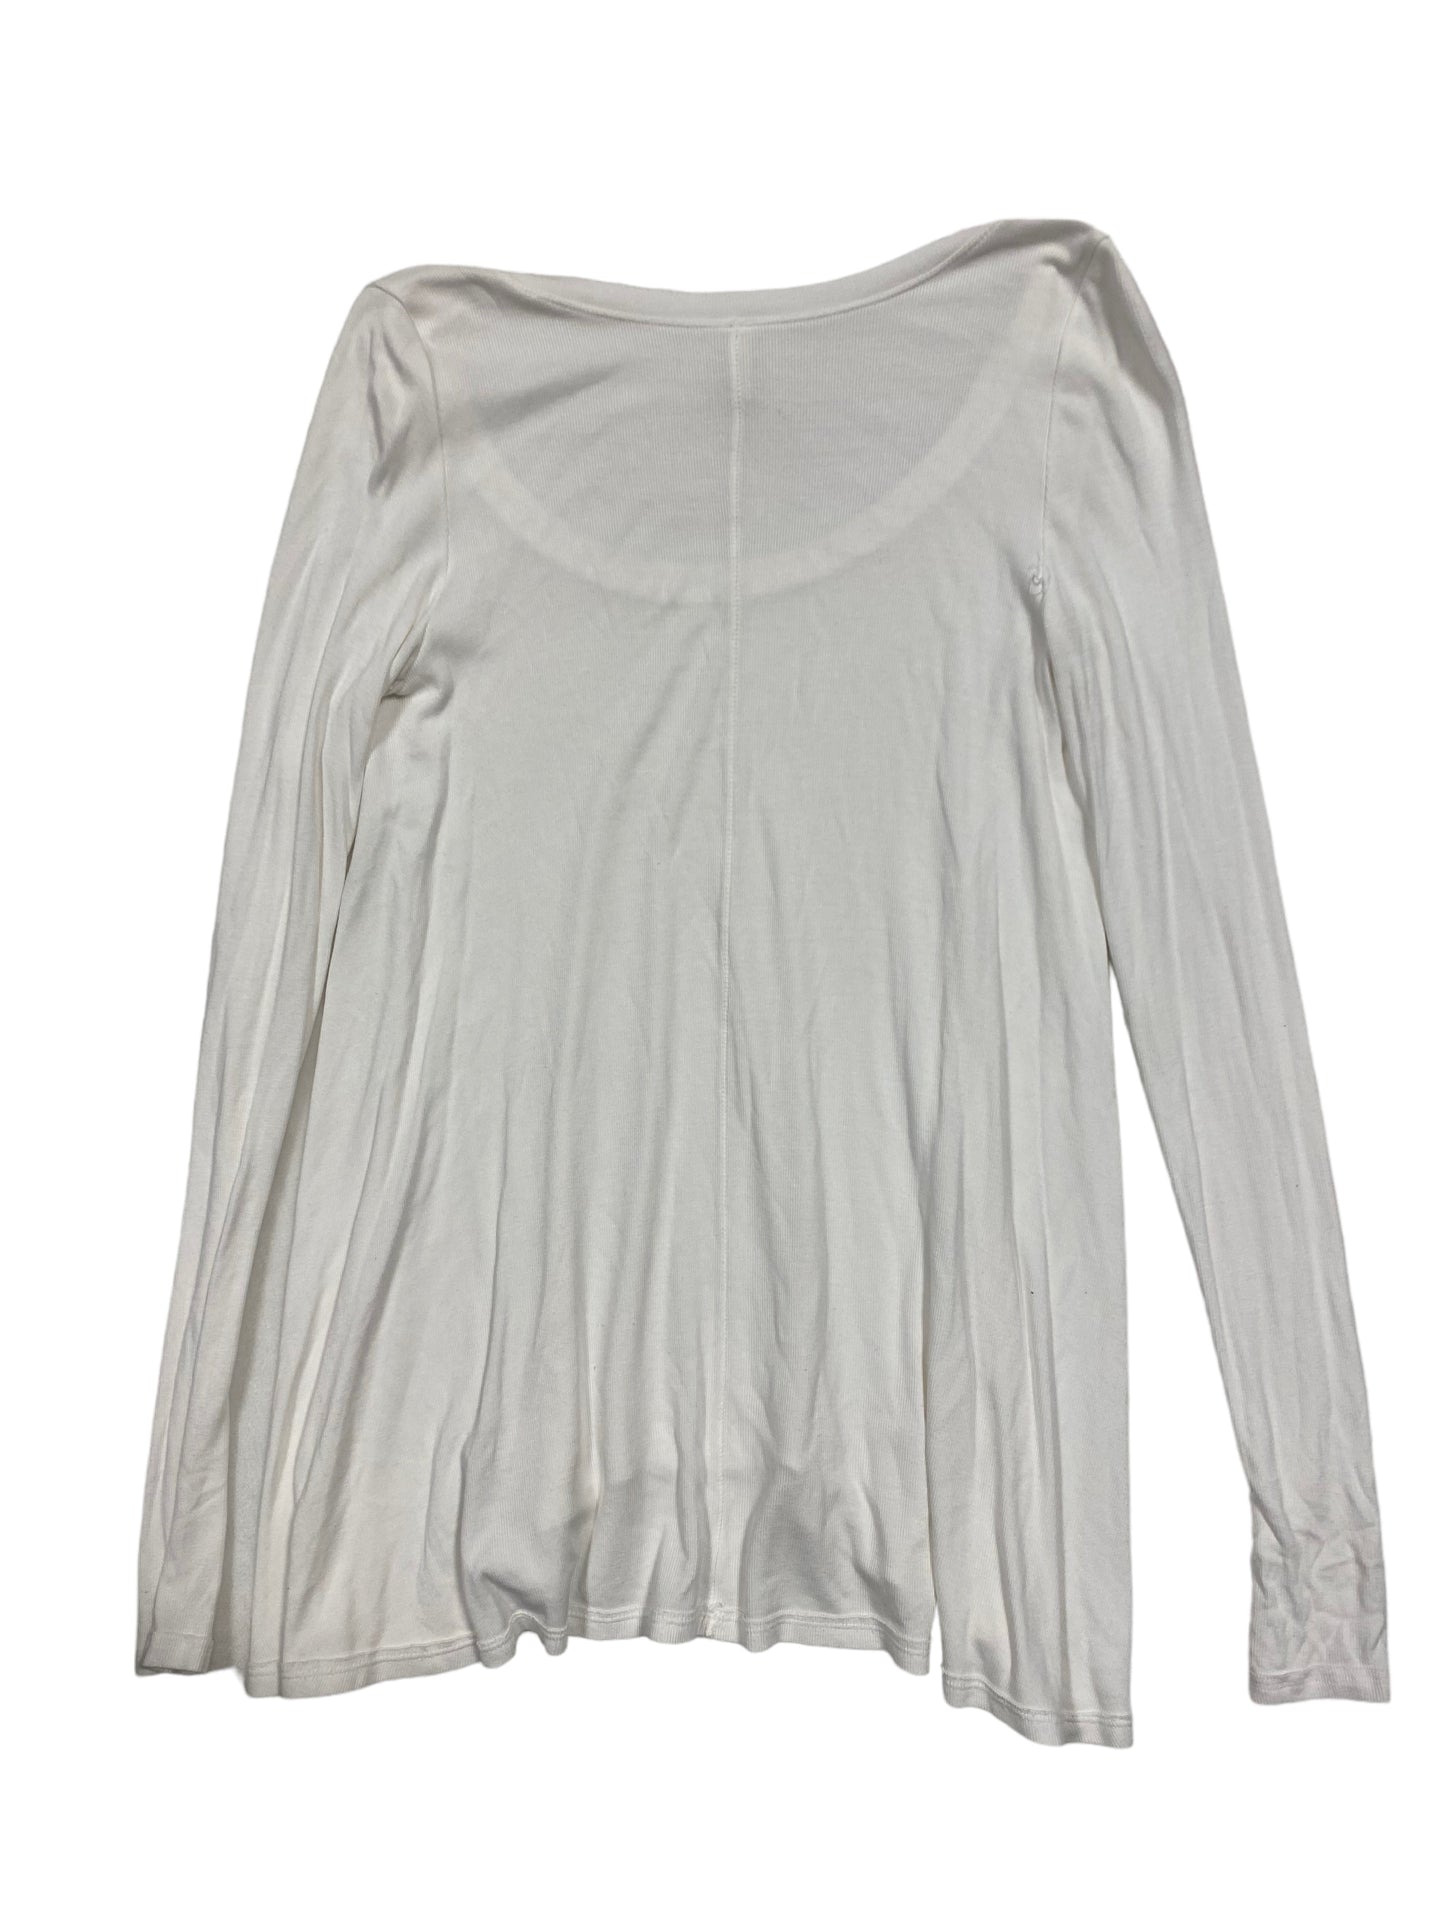 Top Long Sleeve Basic By Free People  Size: M